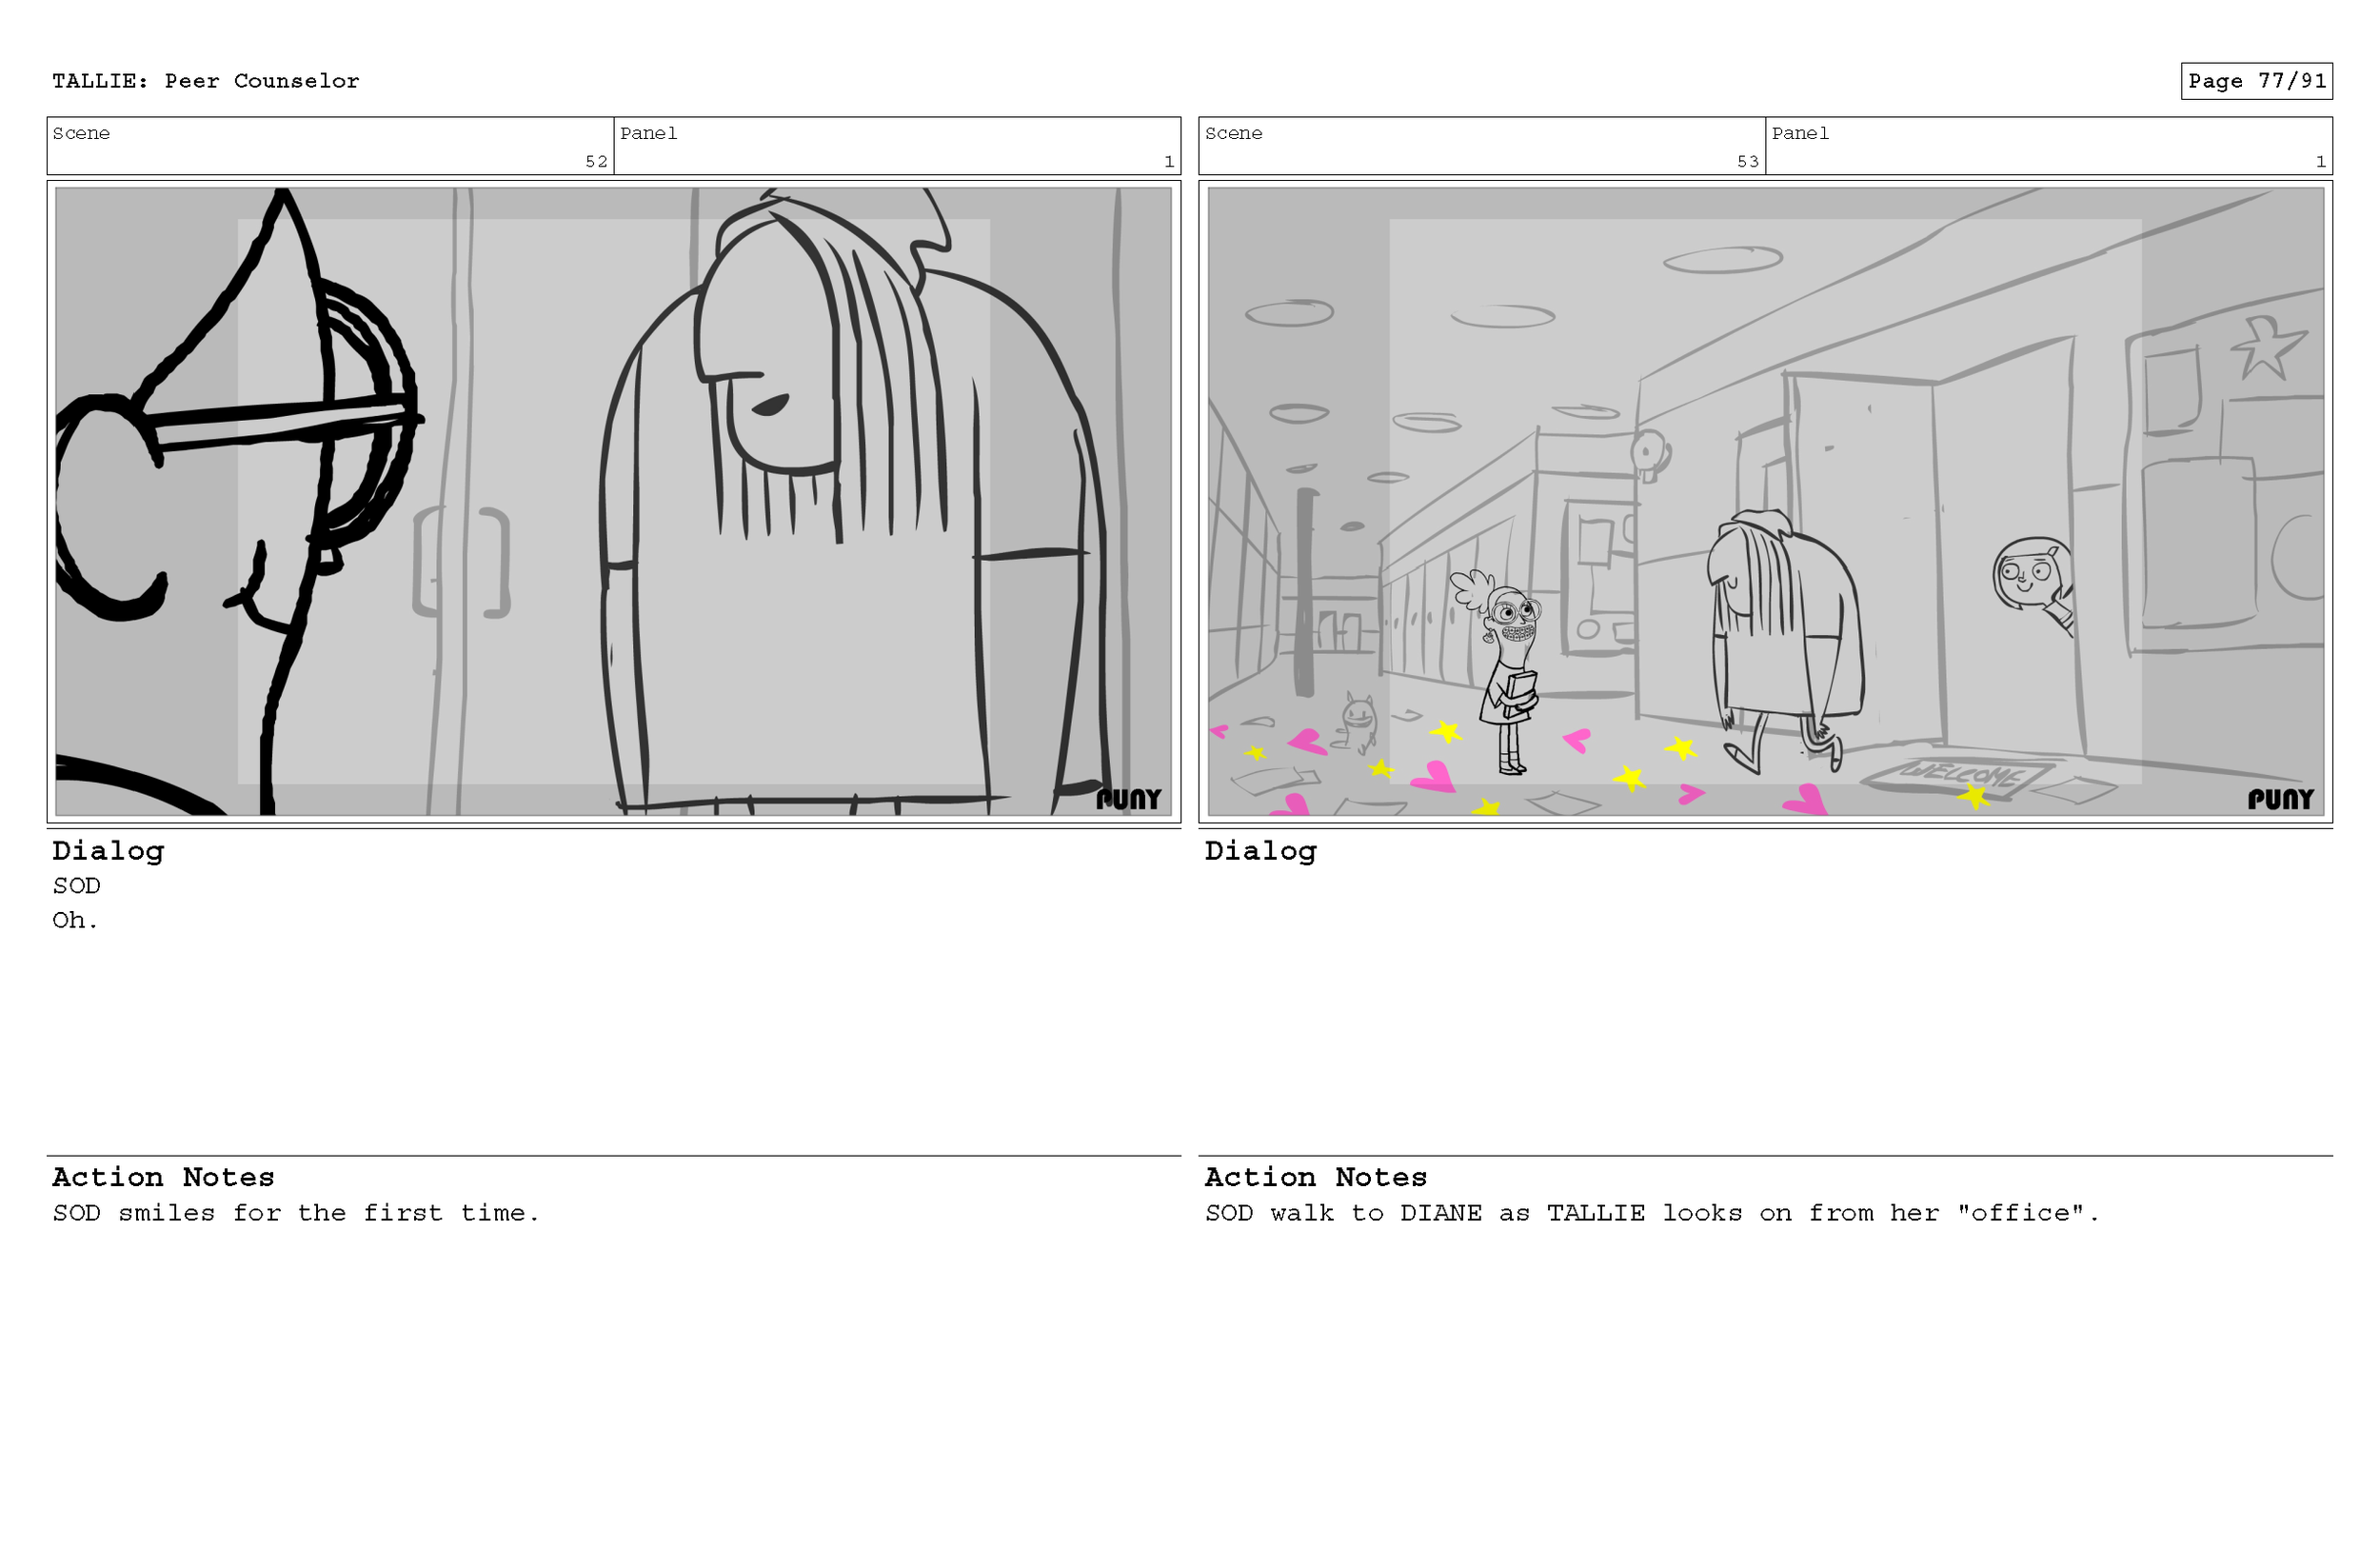 MikeOwens_STORYBOARDS_TallieSilverman_Page_78.png